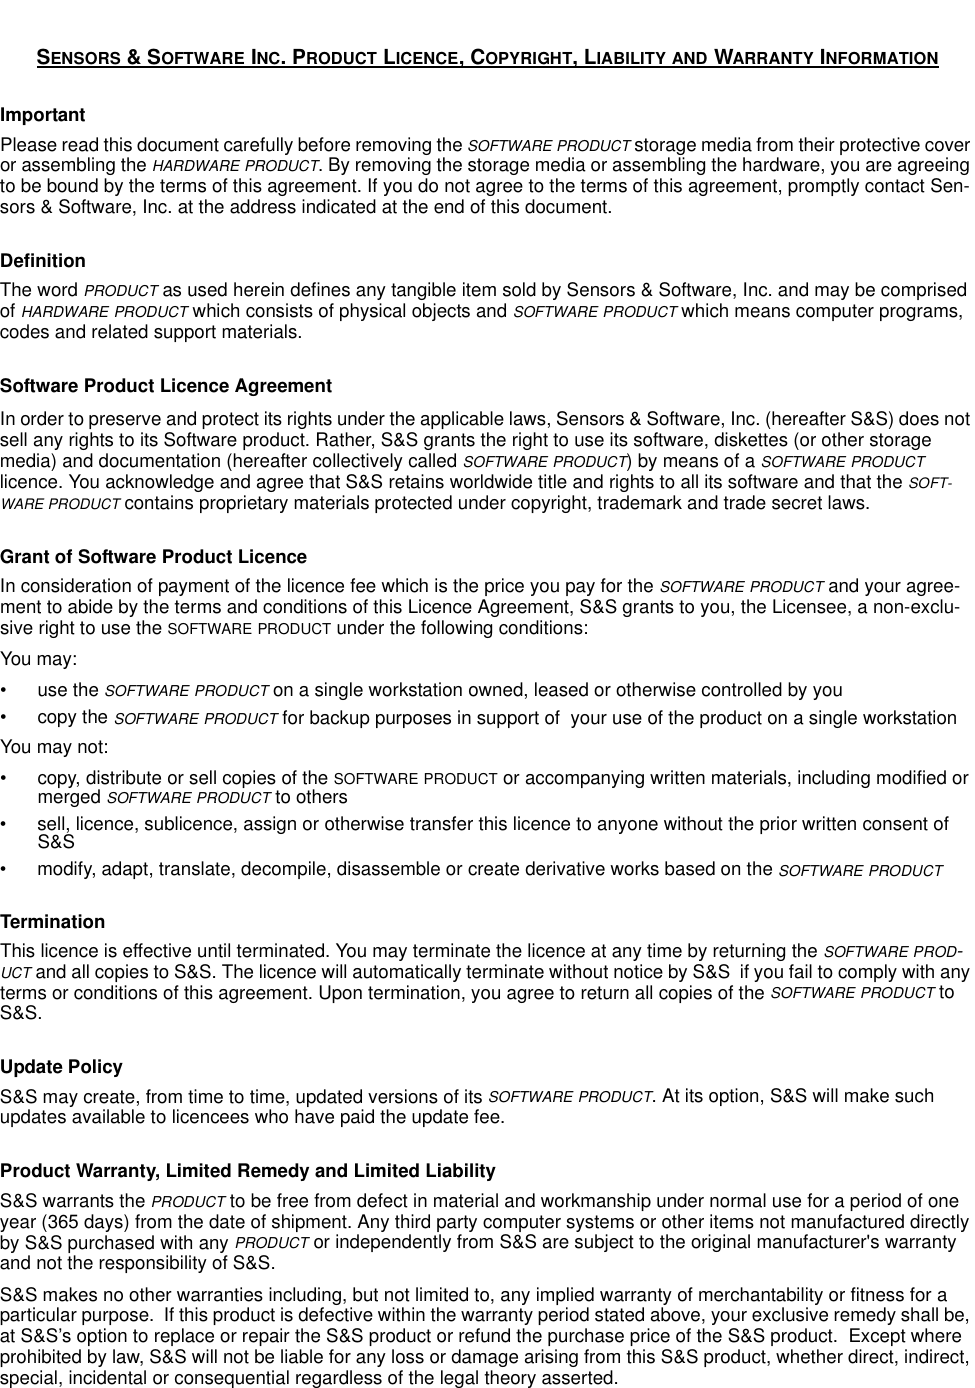 SENSORS &amp; SOFTWARE INC. PRODUCT LICENCE, COPYRIGHT, LIABILITY AND WARRANTY INFORMATIONImportantPlease read this document carefully before removing the SOFTWARE PRODUCT storage media from their protective cover or assembling the HARDWARE PRODUCT. By removing the storage media or assembling the hardware, you are agreeing to be bound by the terms of this agreement. If you do not agree to the terms of this agreement, promptly contact Sen-sors &amp; Software, Inc. at the address indicated at the end of this document.DefinitionThe word PRODUCT as used herein defines any tangible item sold by Sensors &amp; Software, Inc. and may be comprised of HARDWARE PRODUCT which consists of physical objects and SOFTWARE PRODUCT which means computer programs, codes and related support materials.Software Product Licence AgreementIn order to preserve and protect its rights under the applicable laws, Sensors &amp; Software, Inc. (hereafter S&amp;S) does not sell any rights to its Software product. Rather, S&amp;S grants the right to use its software, diskettes (or other storage media) and documentation (hereafter collectively called SOFTWARE PRODUCT) by means of a SOFTWARE PRODUCT licence. You acknowledge and agree that S&amp;S retains worldwide title and rights to all its software and that the SOFT-WARE PRODUCT contains proprietary materials protected under copyright, trademark and trade secret laws.Grant of Software Product LicenceIn consideration of payment of the licence fee which is the price you pay for the SOFTWARE PRODUCT and your agree-ment to abide by the terms and conditions of this Licence Agreement, S&amp;S grants to you, the Licensee, a non-exclu-sive right to use the SOFTWARE PRODUCT under the following conditions:You may:•use the SOFTWARE PRODUCT on a single workstation owned, leased or otherwise controlled by you• copy the SOFTWARE PRODUCT for backup purposes in support of  your use of the product on a single workstationYou may not:• copy, distribute or sell copies of the SOFTWARE PRODUCT or accompanying written materials, including modified or merged SOFTWARE PRODUCT to others• sell, licence, sublicence, assign or otherwise transfer this licence to anyone without the prior written consent of S&amp;S• modify, adapt, translate, decompile, disassemble or create derivative works based on the SOFTWARE PRODUCTTerminationThis licence is effective until terminated. You may terminate the licence at any time by returning the SOFTWARE PROD-UCT and all copies to S&amp;S. The licence will automatically terminate without notice by S&amp;S  if you fail to comply with any terms or conditions of this agreement. Upon termination, you agree to return all copies of the SOFTWARE PRODUCT to S&amp;S.Update PolicyS&amp;S may create, from time to time, updated versions of its SOFTWARE PRODUCT. At its option, S&amp;S will make such updates available to licencees who have paid the update fee.Product Warranty, Limited Remedy and Limited Liability S&amp;S warrants the PRODUCT to be free from defect in material and workmanship under normal use for a period of one year (365 days) from the date of shipment. Any third party computer systems or other items not manufactured directly by S&amp;S purchased with any PRODUCT or independently from S&amp;S are subject to the original manufacturer&apos;s warranty and not the responsibility of S&amp;S.S&amp;S makes no other warranties including, but not limited to, any implied warranty of merchantability or fitness for a particular purpose.  If this product is defective within the warranty period stated above, your exclusive remedy shall be, at S&amp;S’s option to replace or repair the S&amp;S product or refund the purchase price of the S&amp;S product.  Except where prohibited by law, S&amp;S will not be liable for any loss or damage arising from this S&amp;S product, whether direct, indirect, special, incidental or consequential regardless of the legal theory asserted.